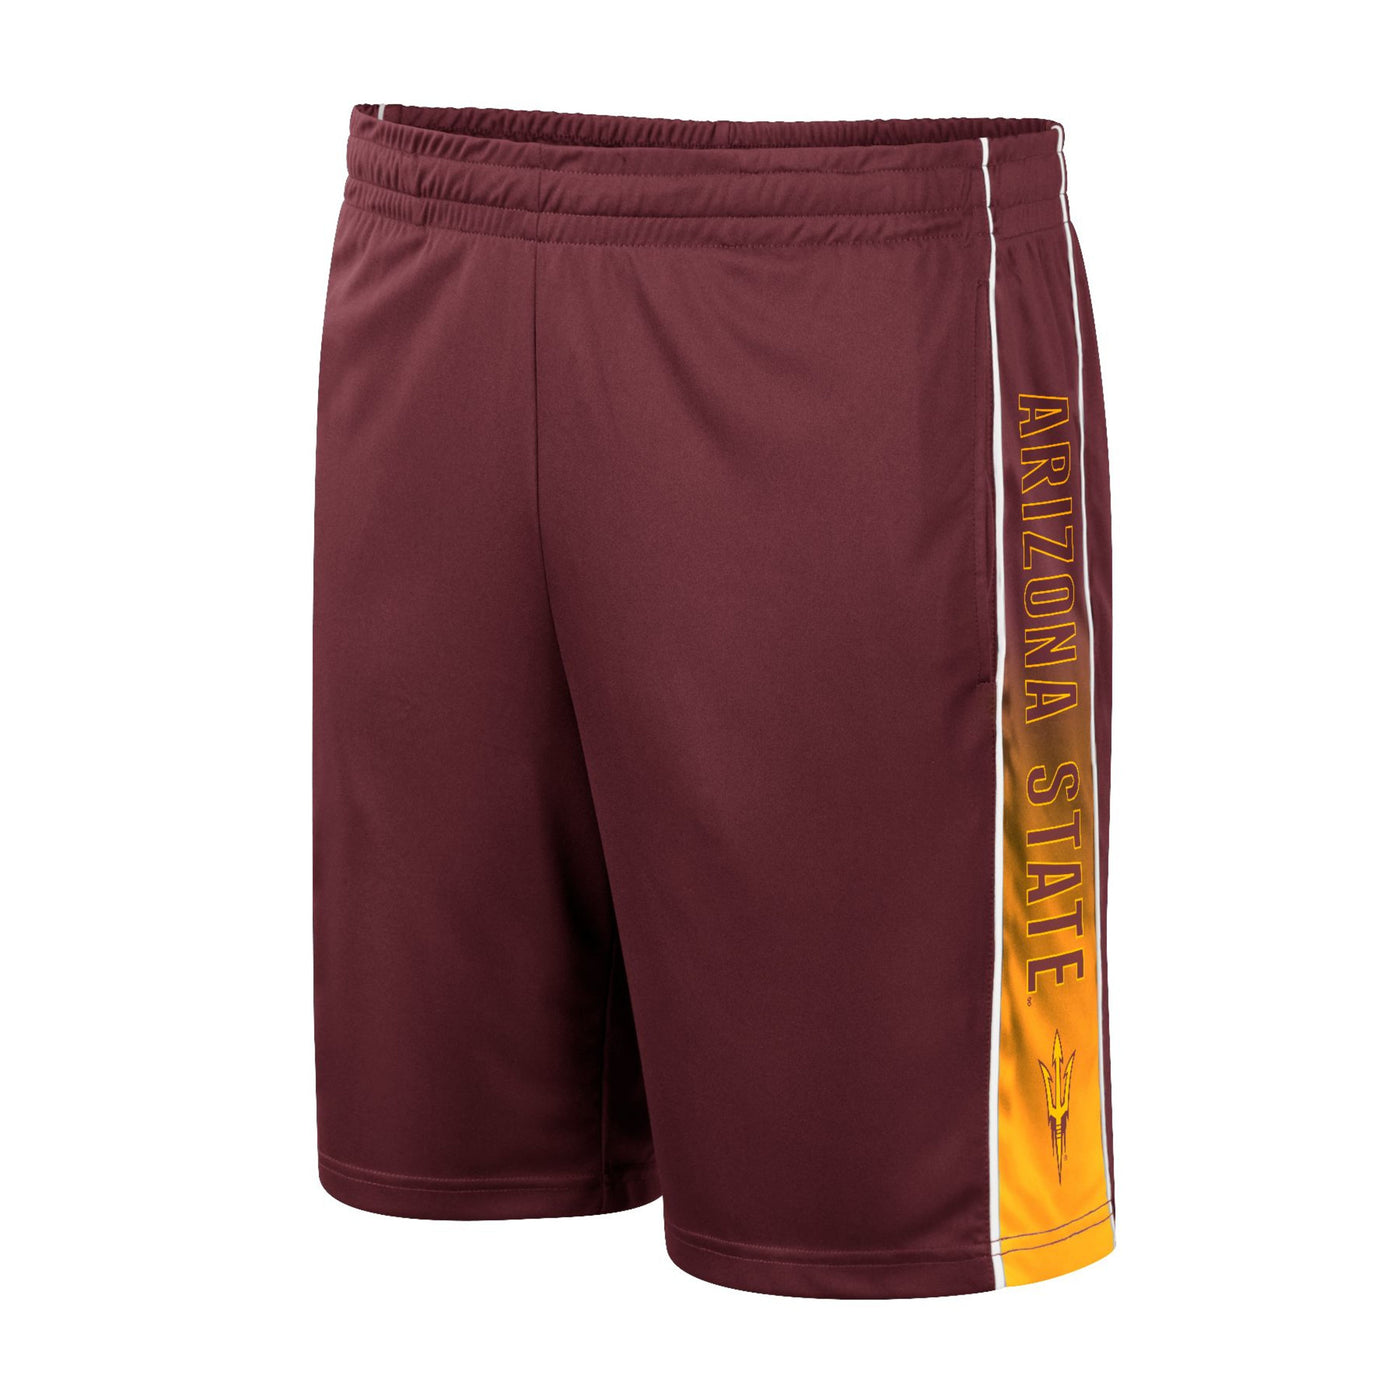 ASU Men's maroon shorts with maroon and gold faded stripes down the side with 'Arizona State' and a pitchfork inside